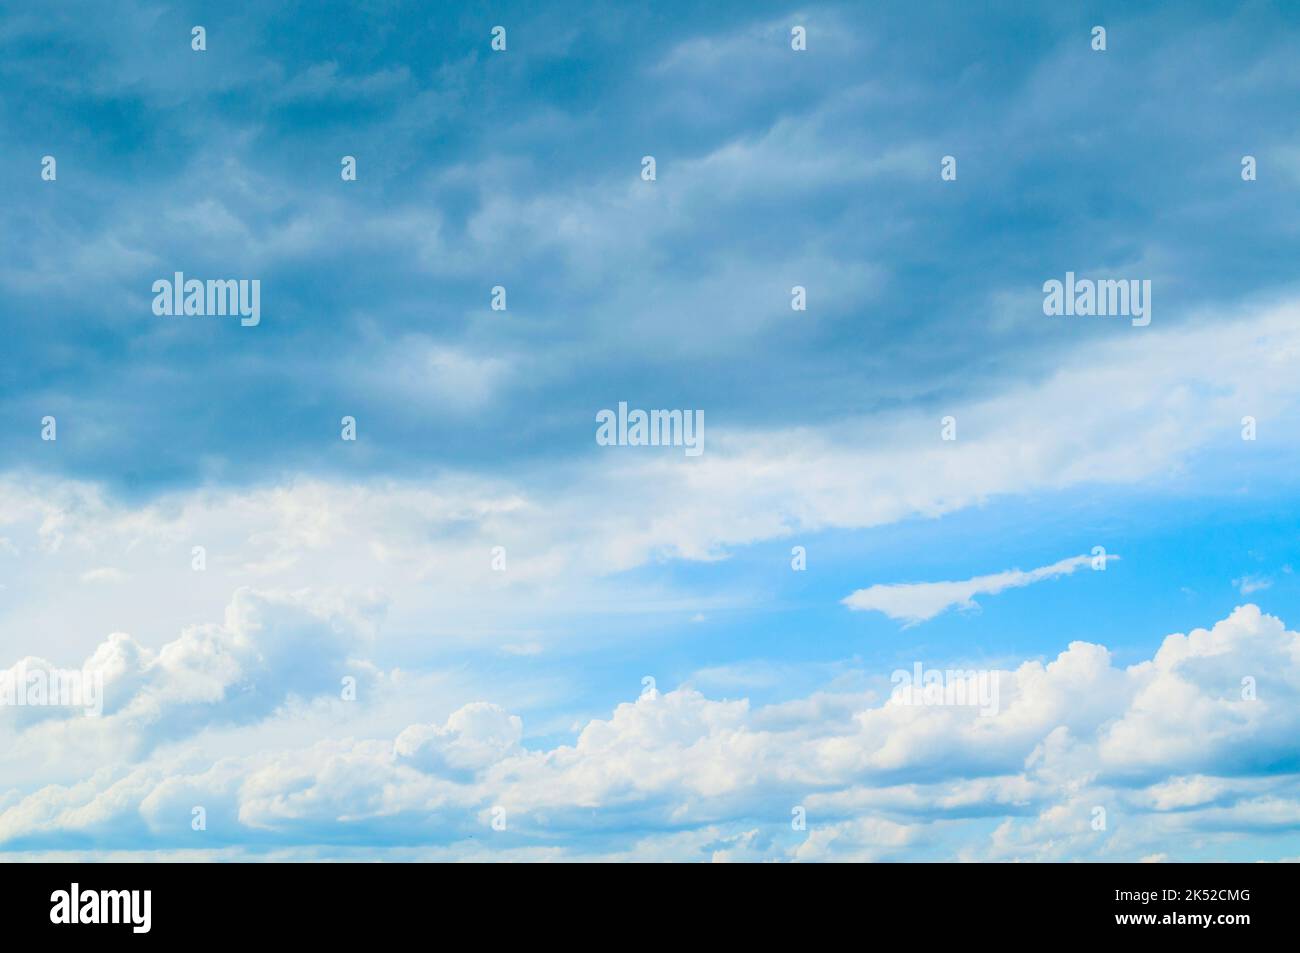 Cloudy sky background, cloudy sky landscape scene with colorful clouds Stock Photo